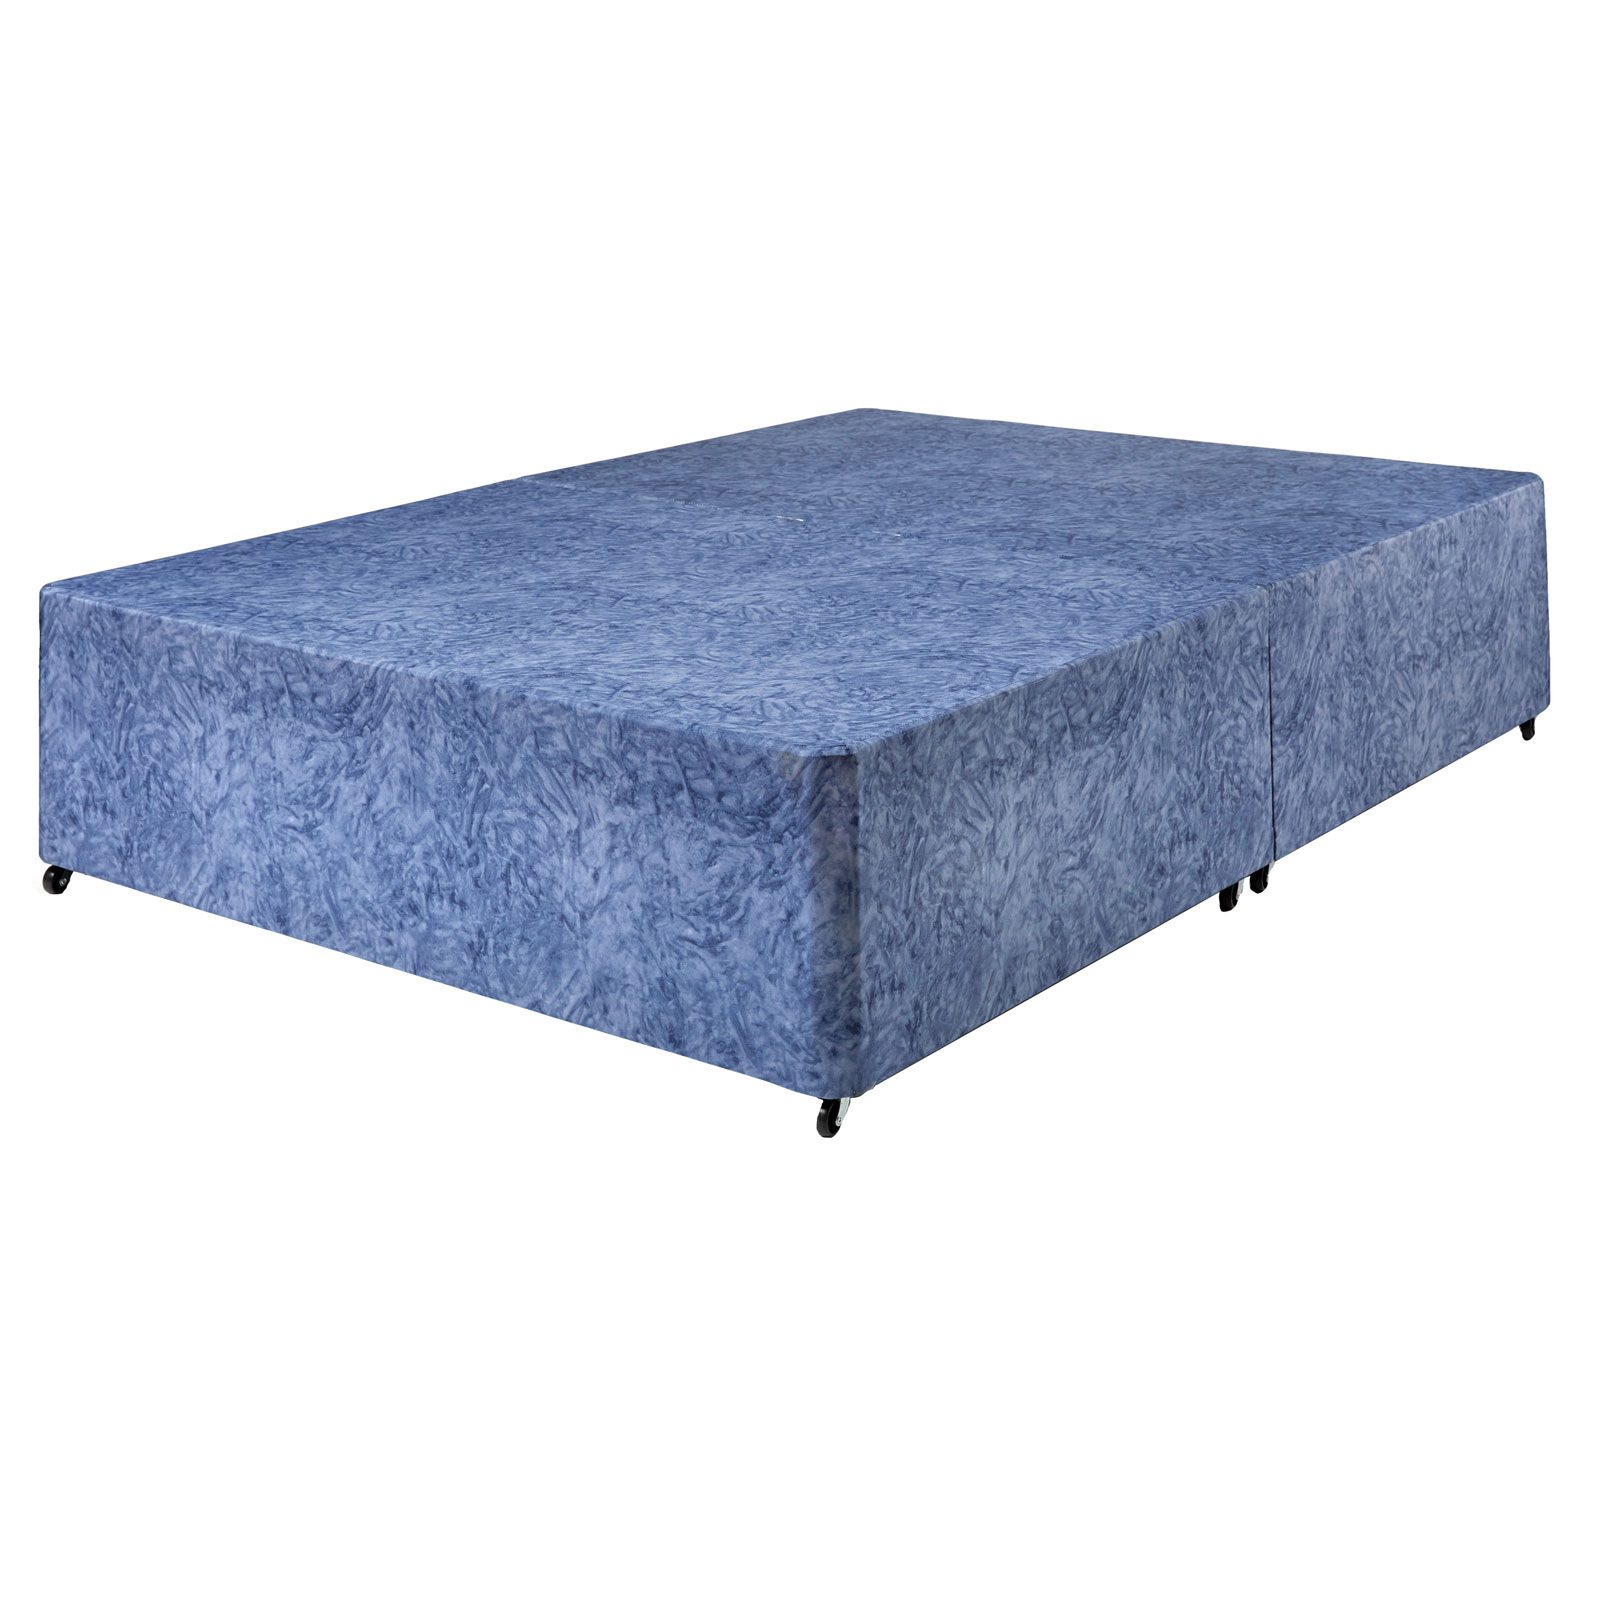 Kalvo Bed Base With Vapour Permeable Cover